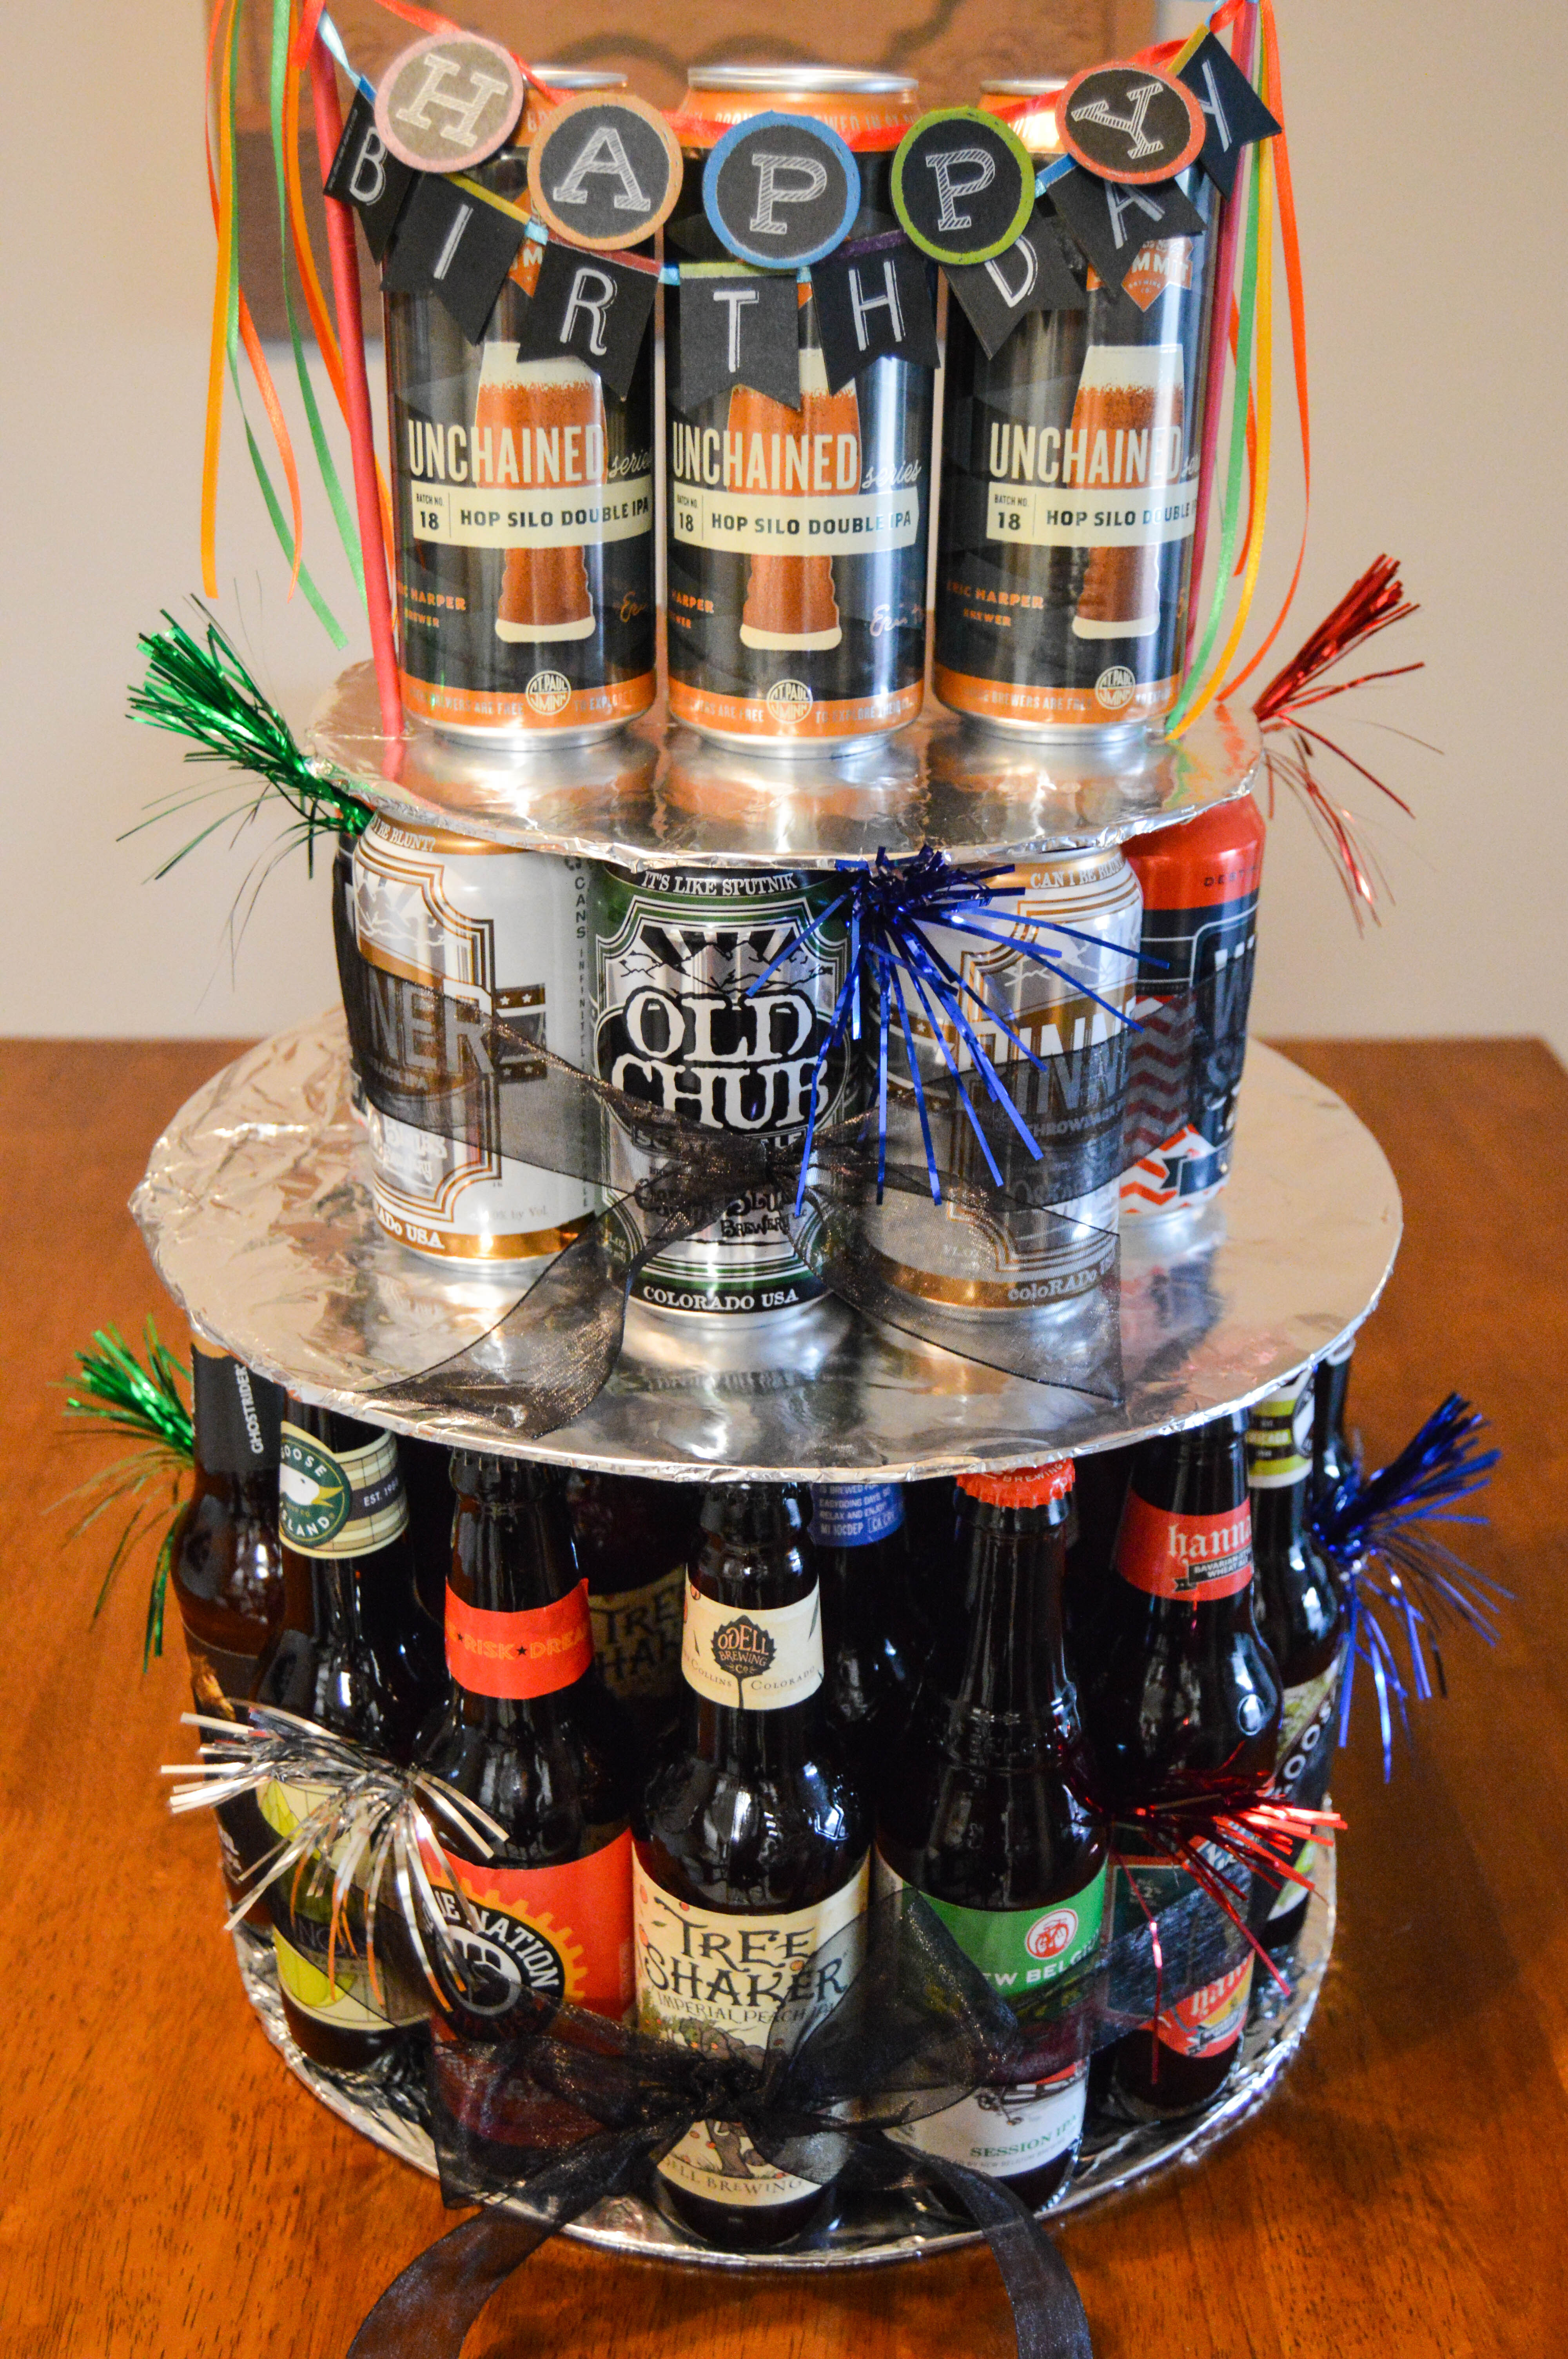 Beer Birthday Cake
 How to Make a Beer Bottle or Can Birthday Cake